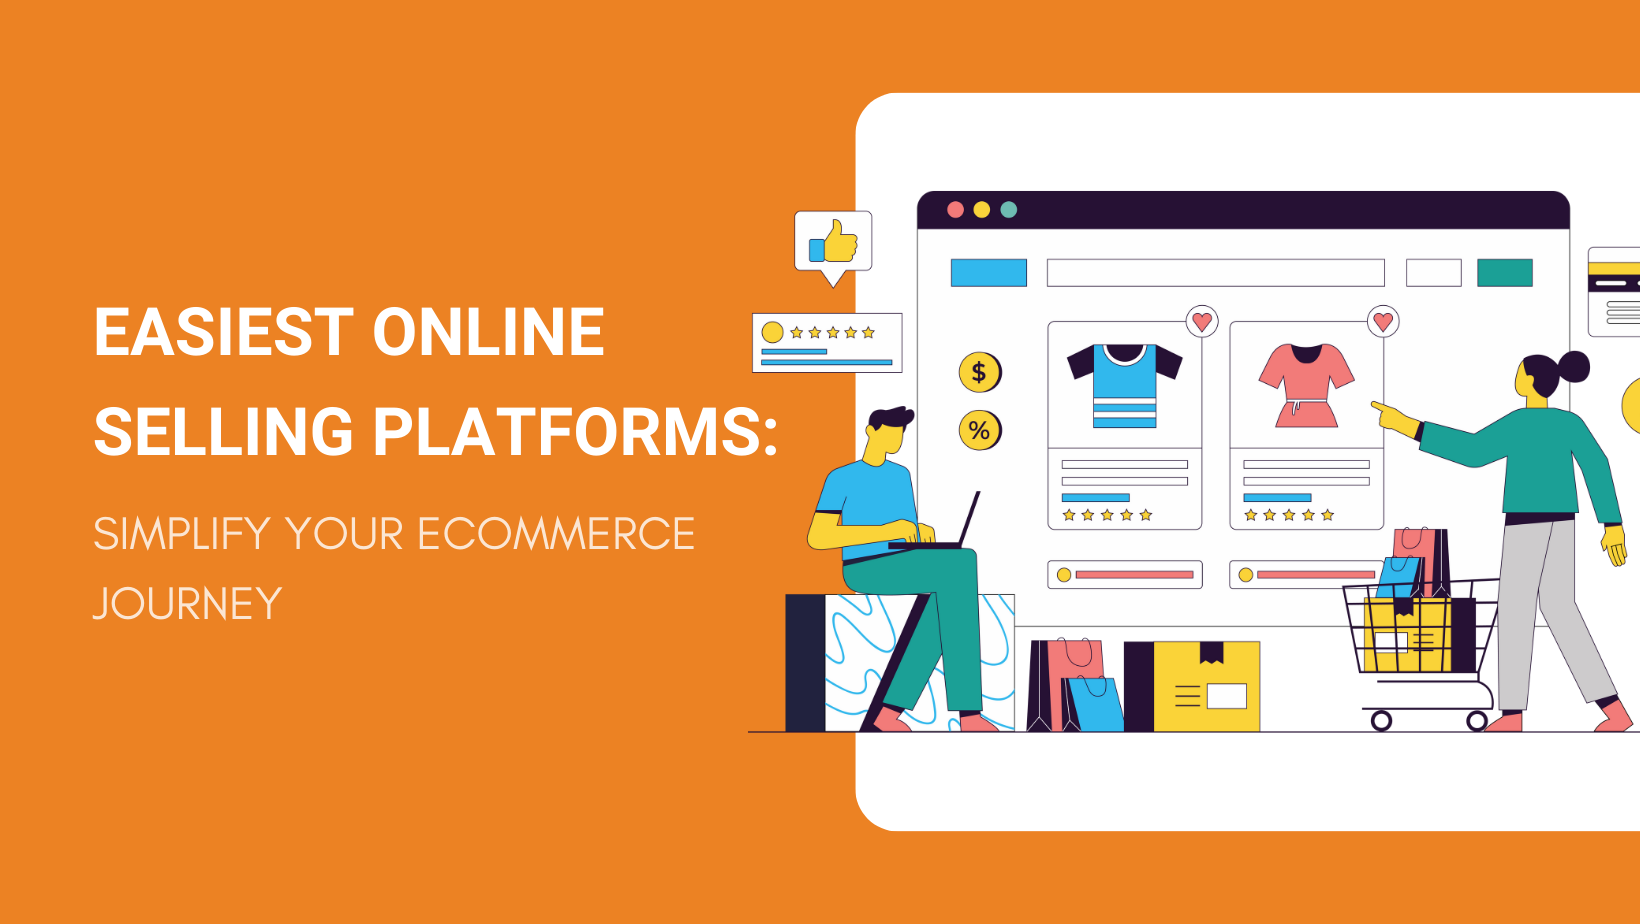 EASIEST ONLINE SELLING PLATFORMS SIMPLIFY YOUR ECOMMERCE JOURNEY